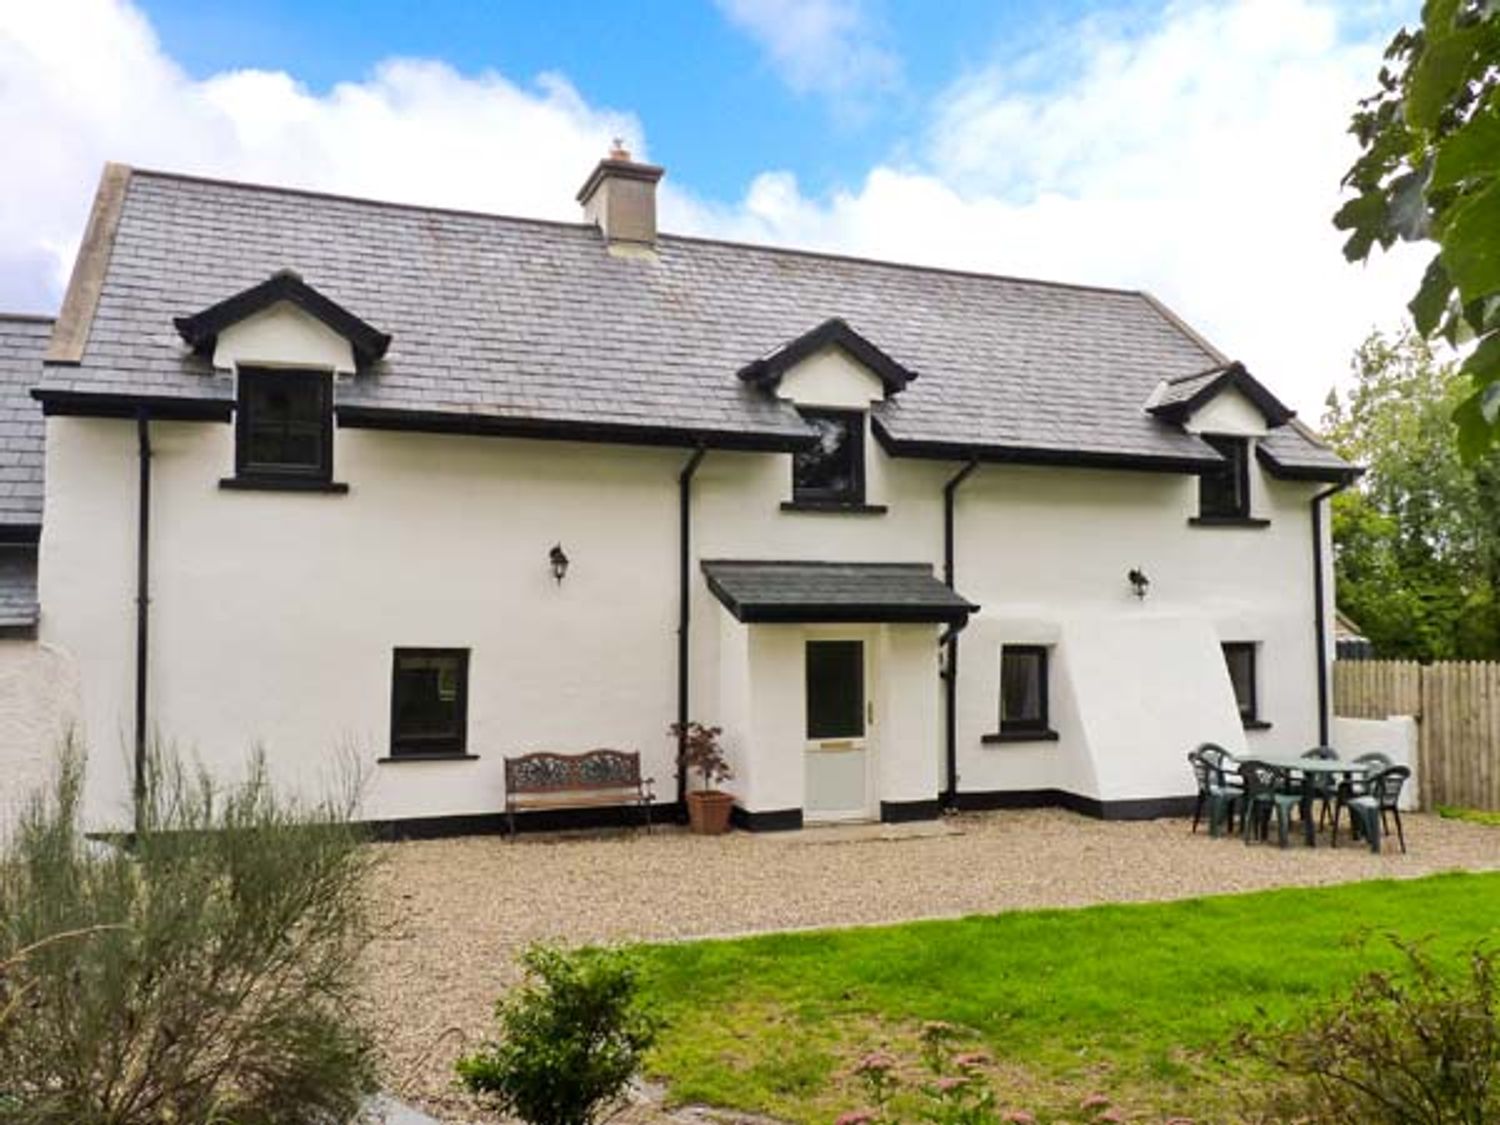 Home Farm Cottage - County Wexford - 3862 - photo 1